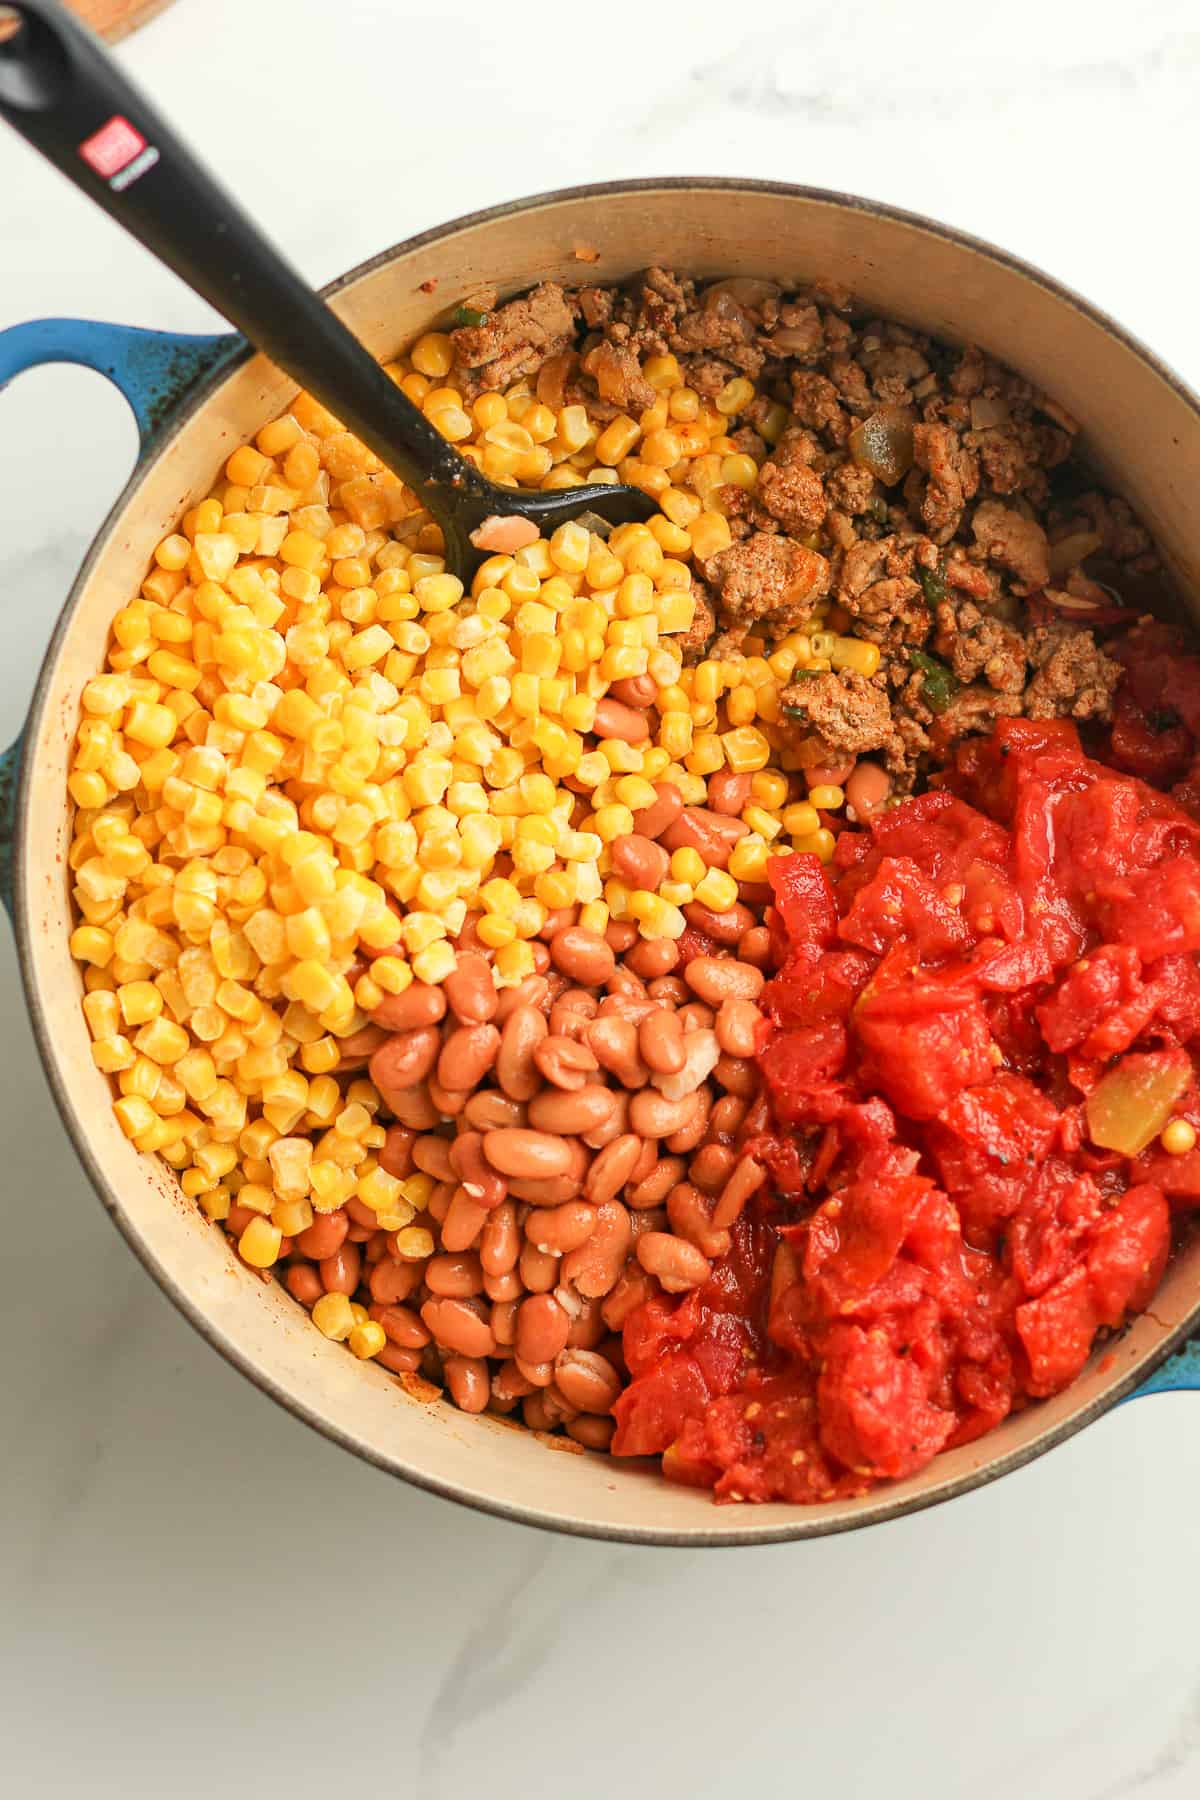 The soup pot with the corn, beans, and tomatoes on top.